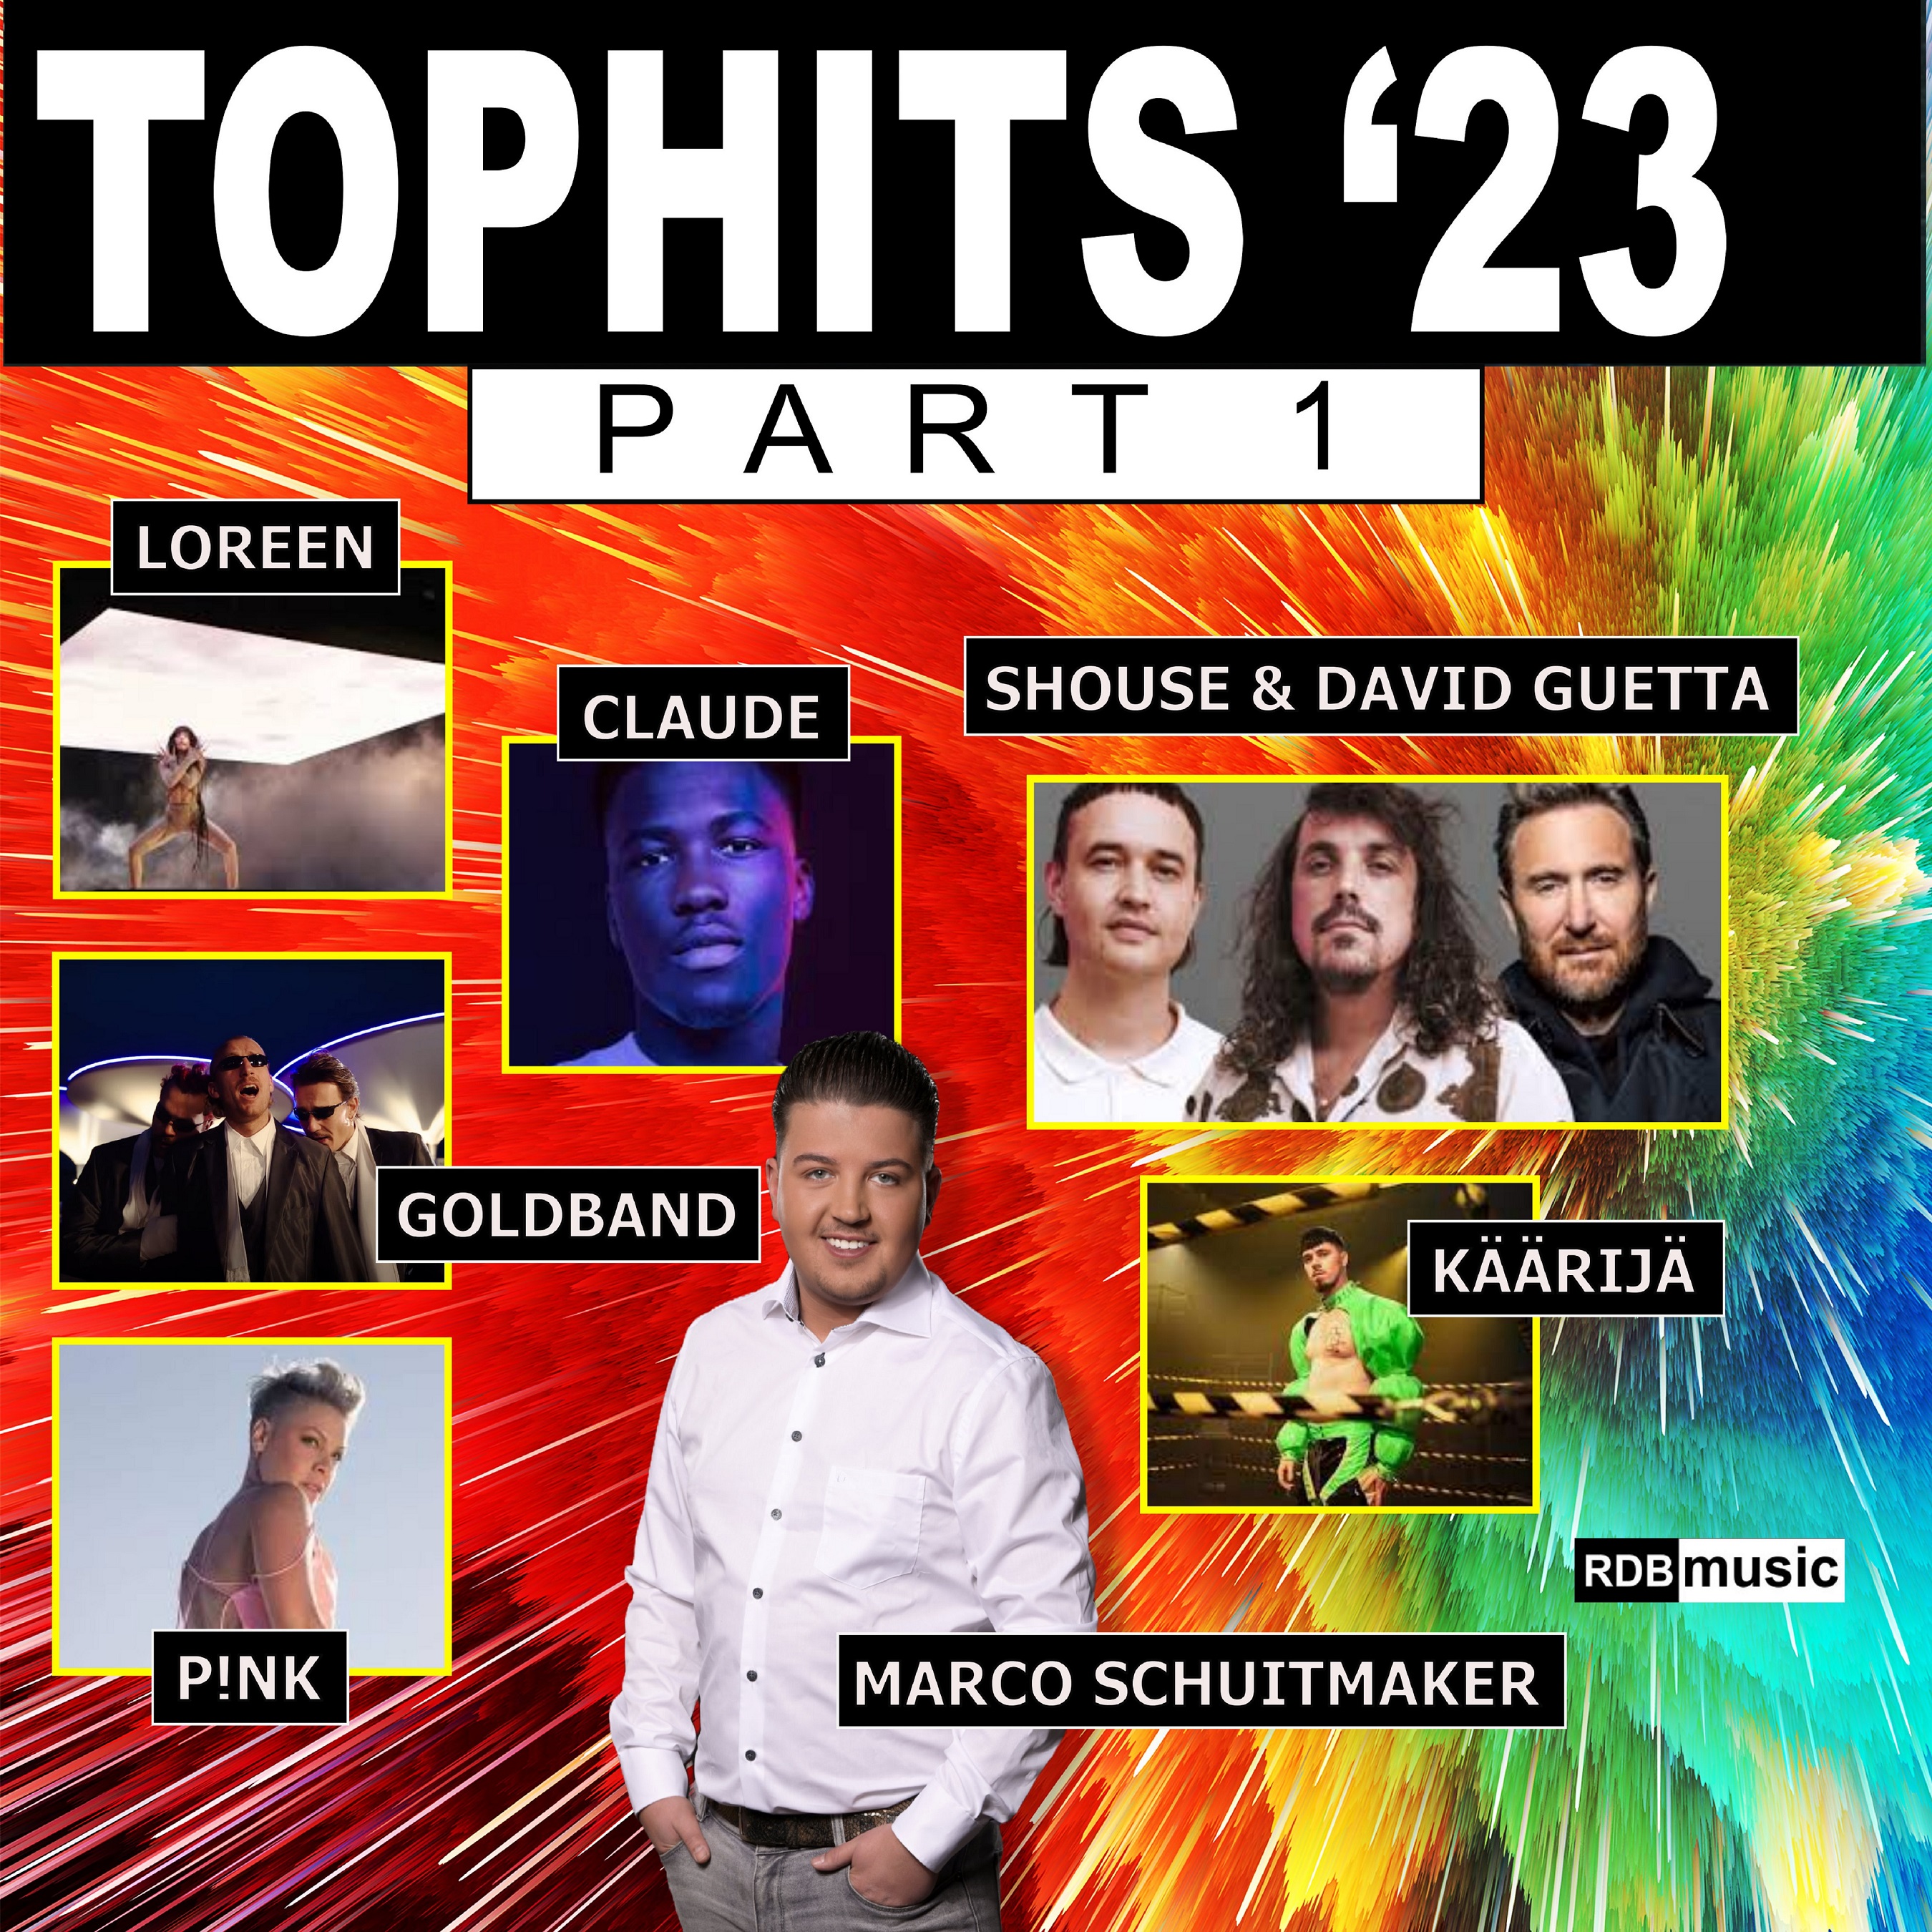 Tophits'23 Part 1